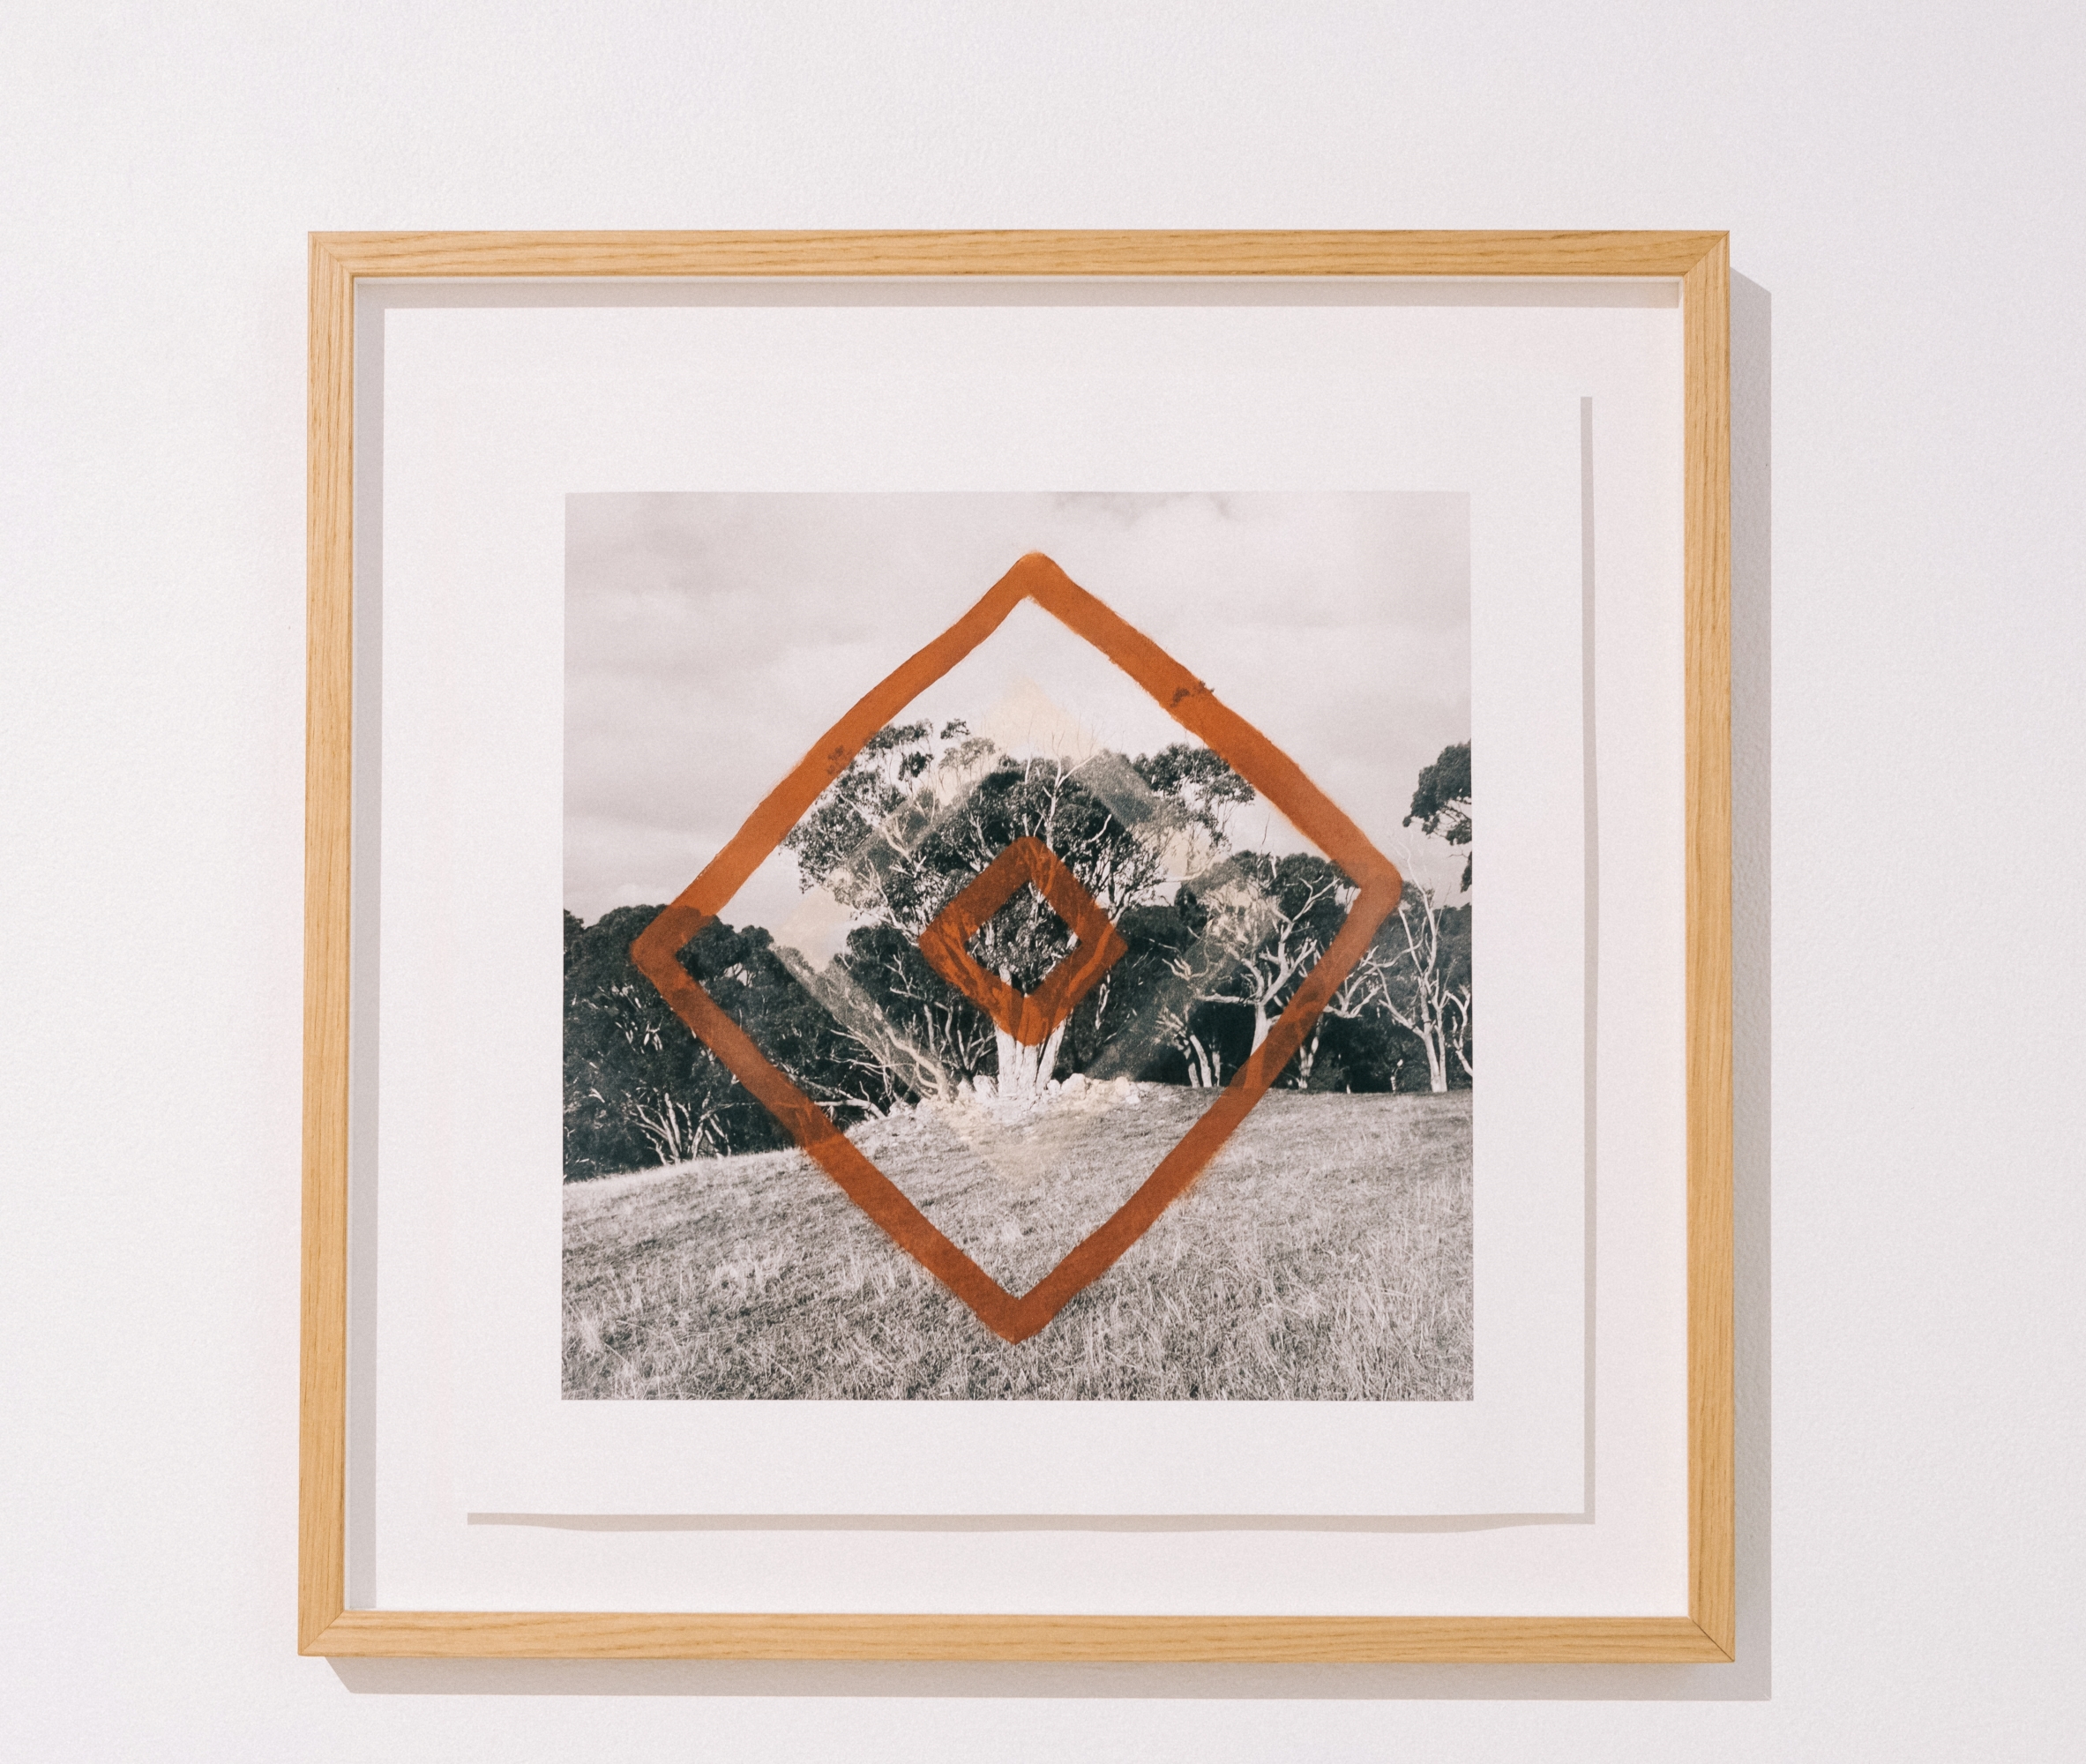 Timber framed square black and white photograph of trees between grass and sky with two hollow diamond lines painted in orange centrally over the top.